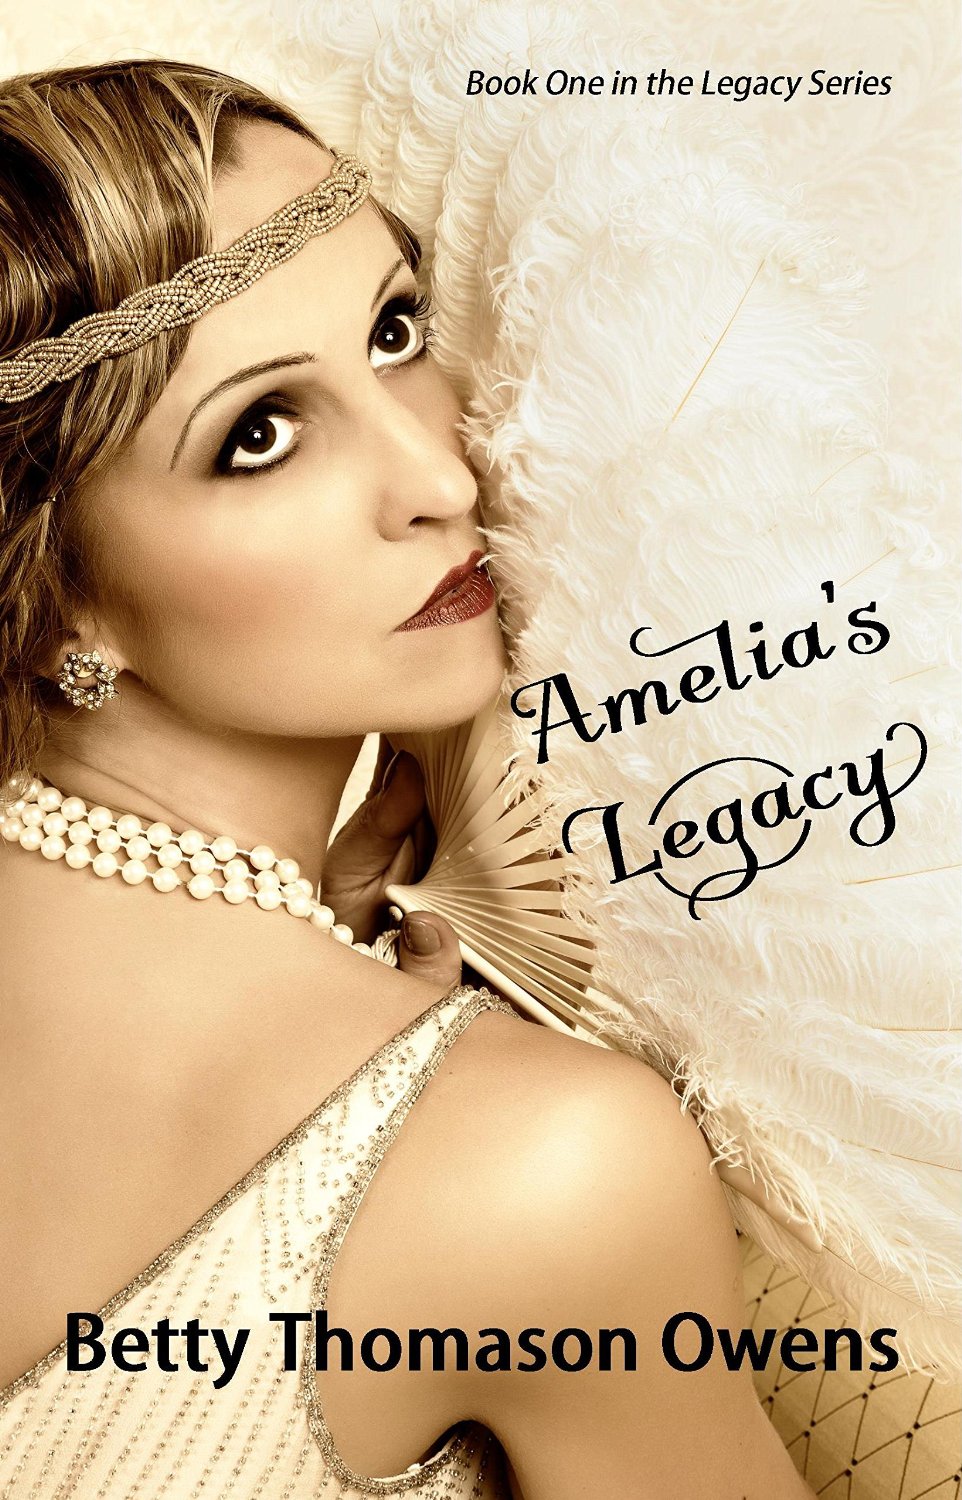 Video of the Week: Amelia’s Legacy by Betty Thomason Owens